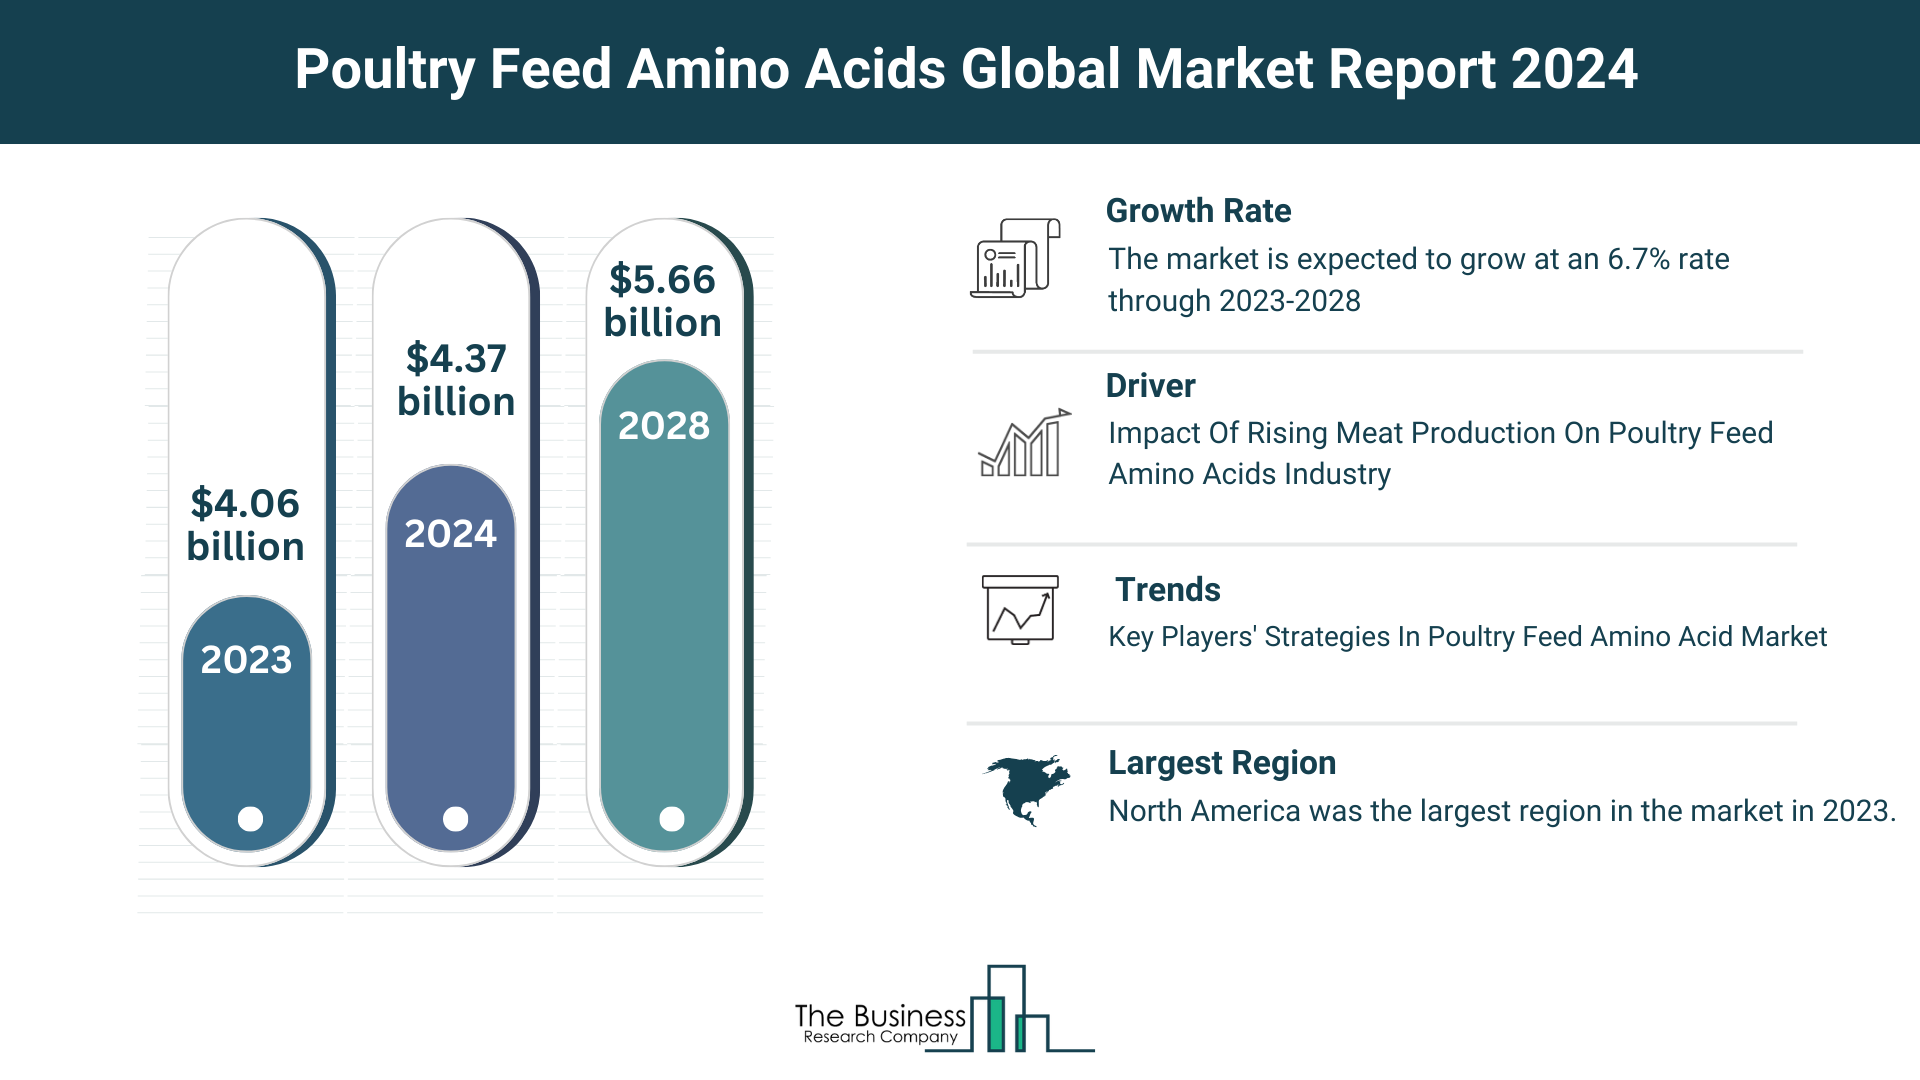 Poultry Feed Amino Acids Market Overview: Market Size, Major Drivers And Trends